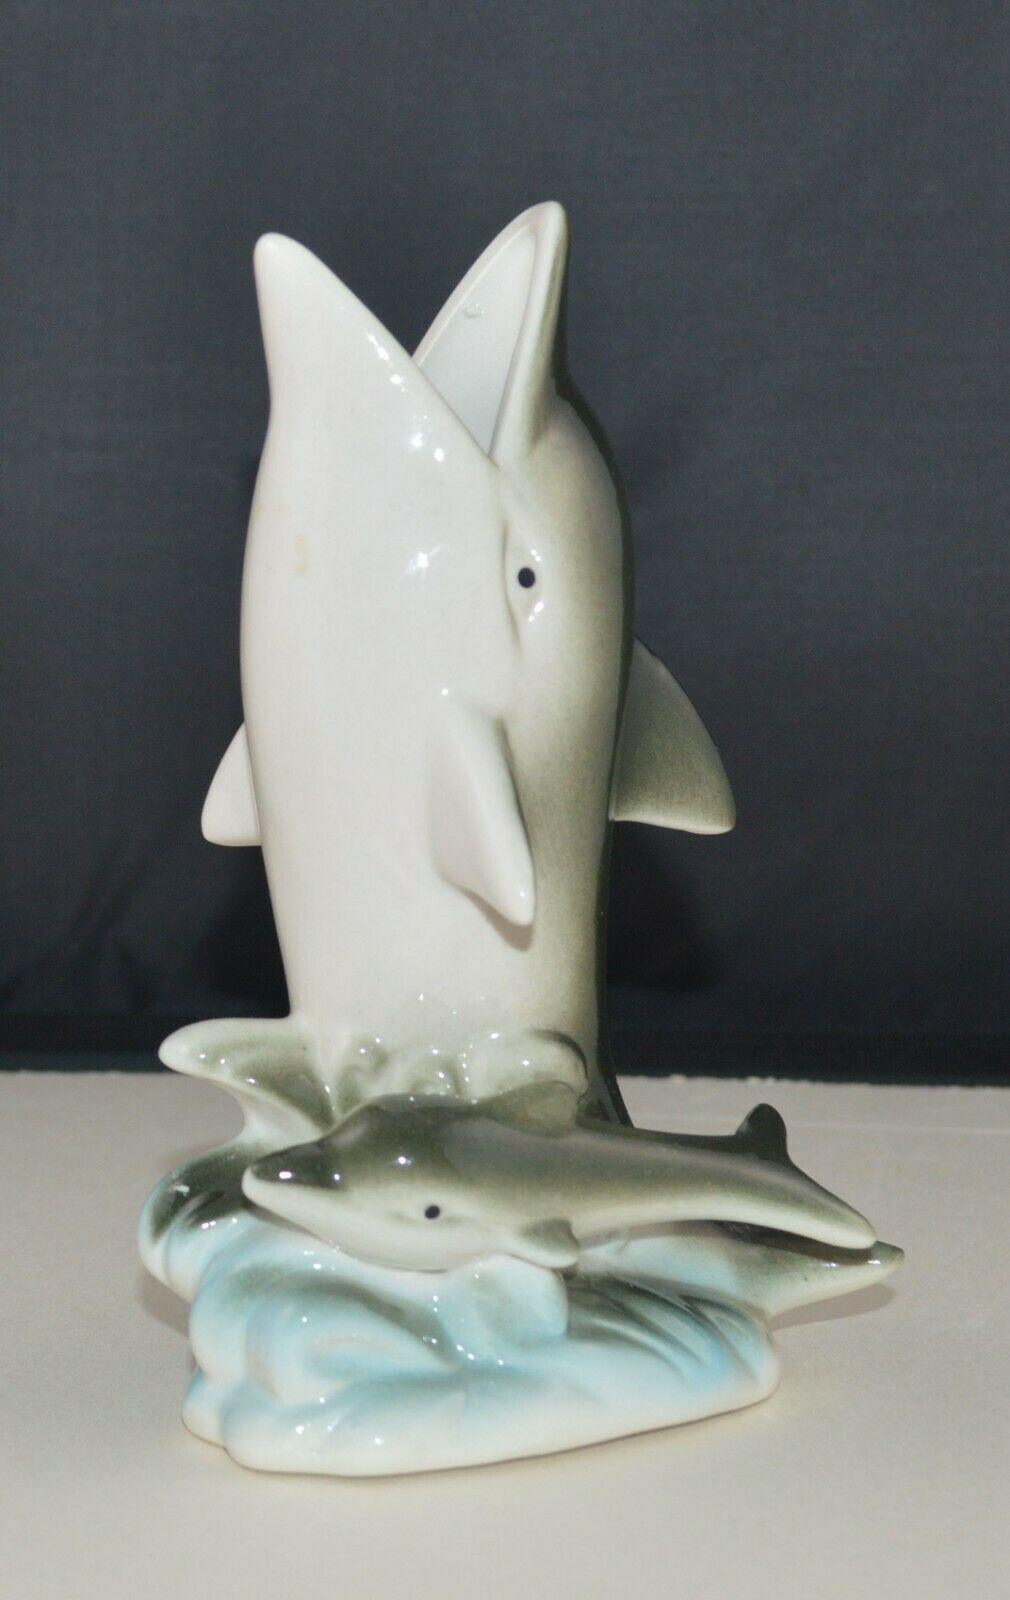 DOLPHIN ORNAMENT (PREVIOUSLY OWNED) GOOD CONDITION - TMD167207